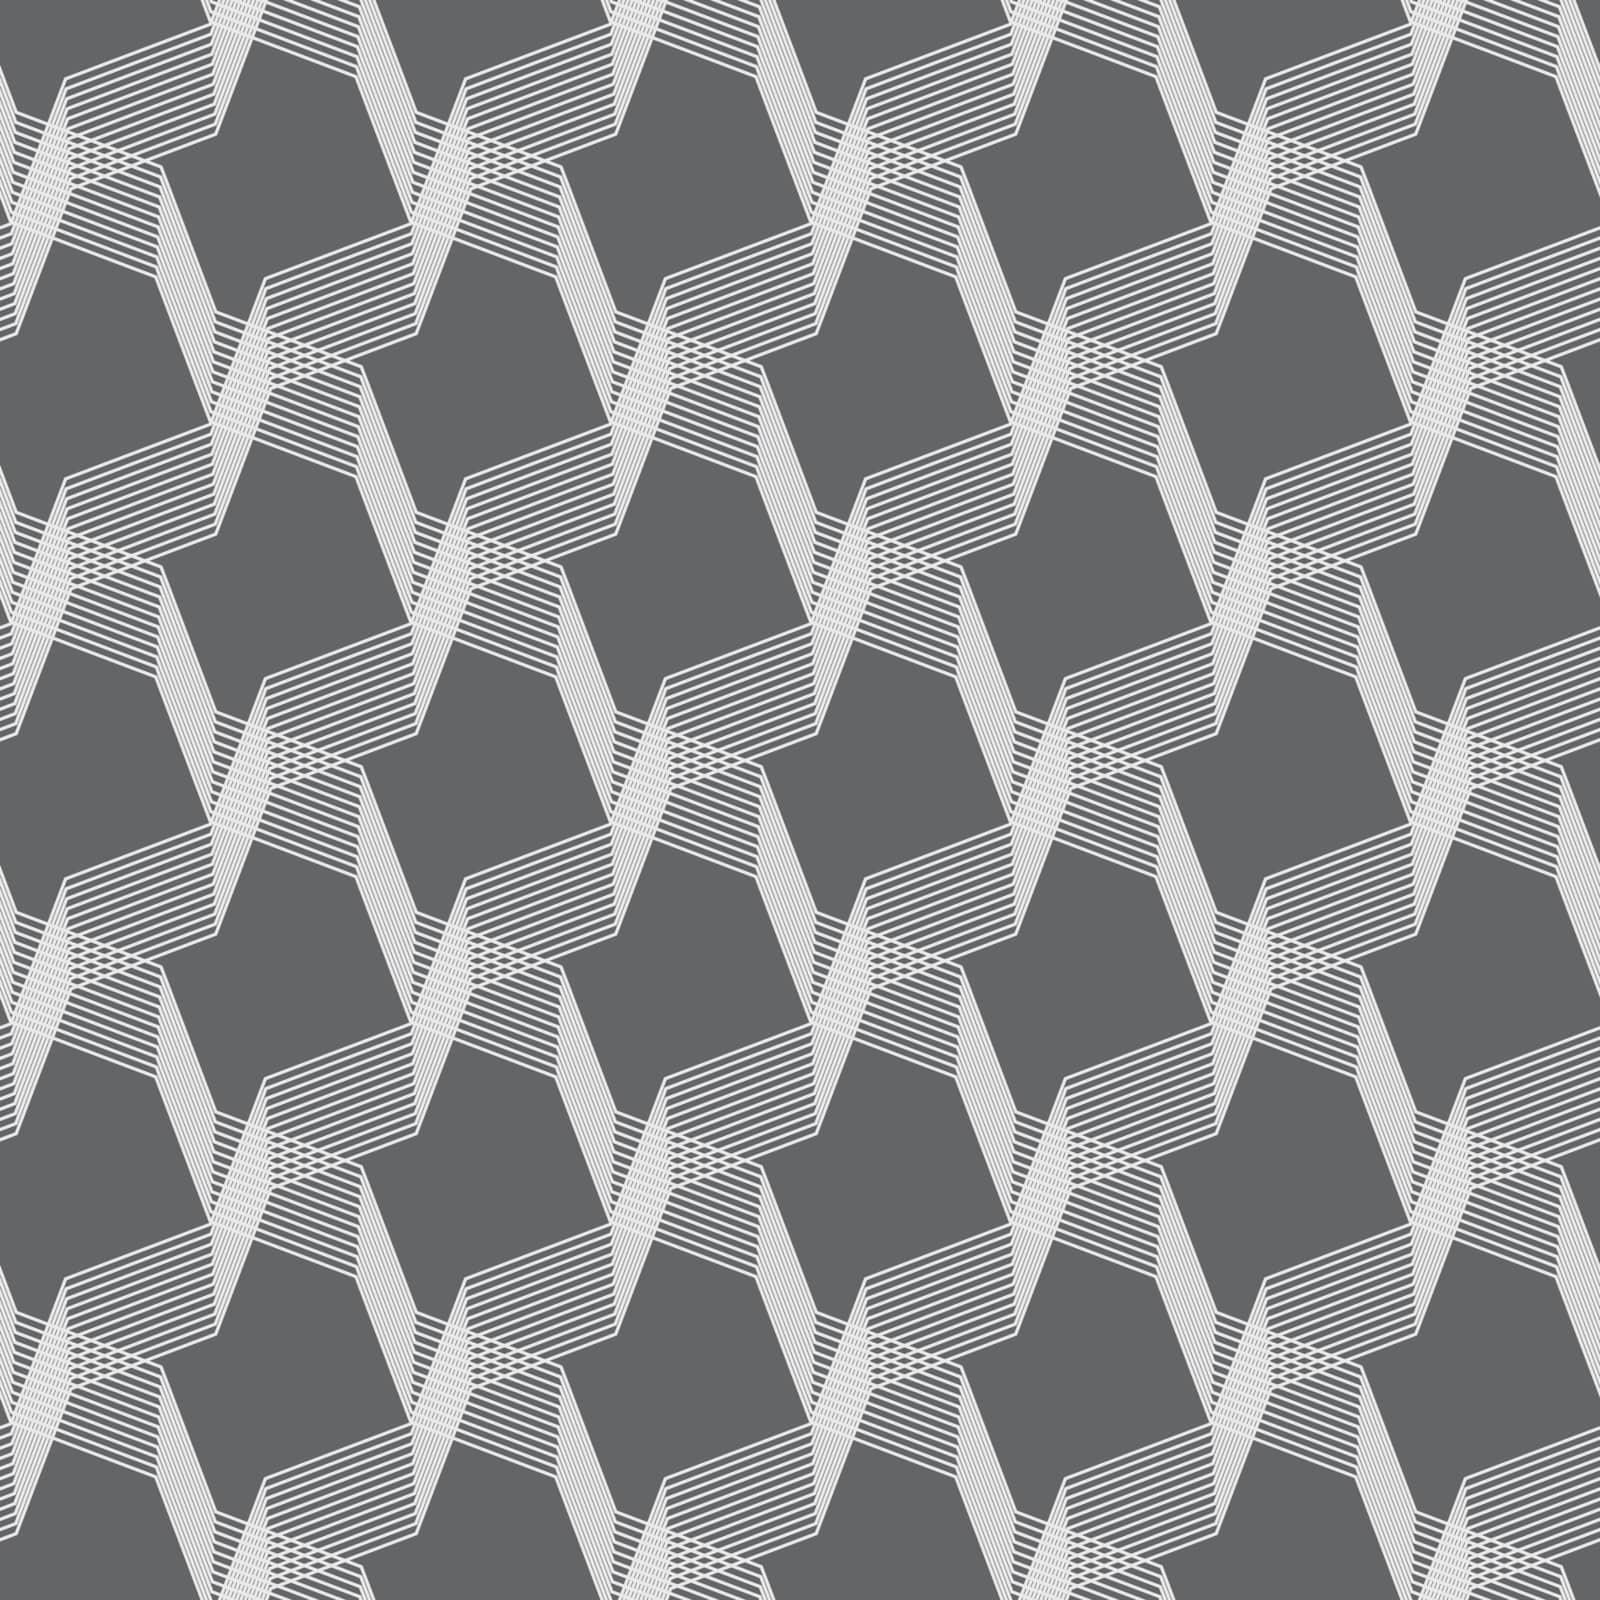 Monochrome pattern with gray intersecting thin lines on gray by Zebra-Finch